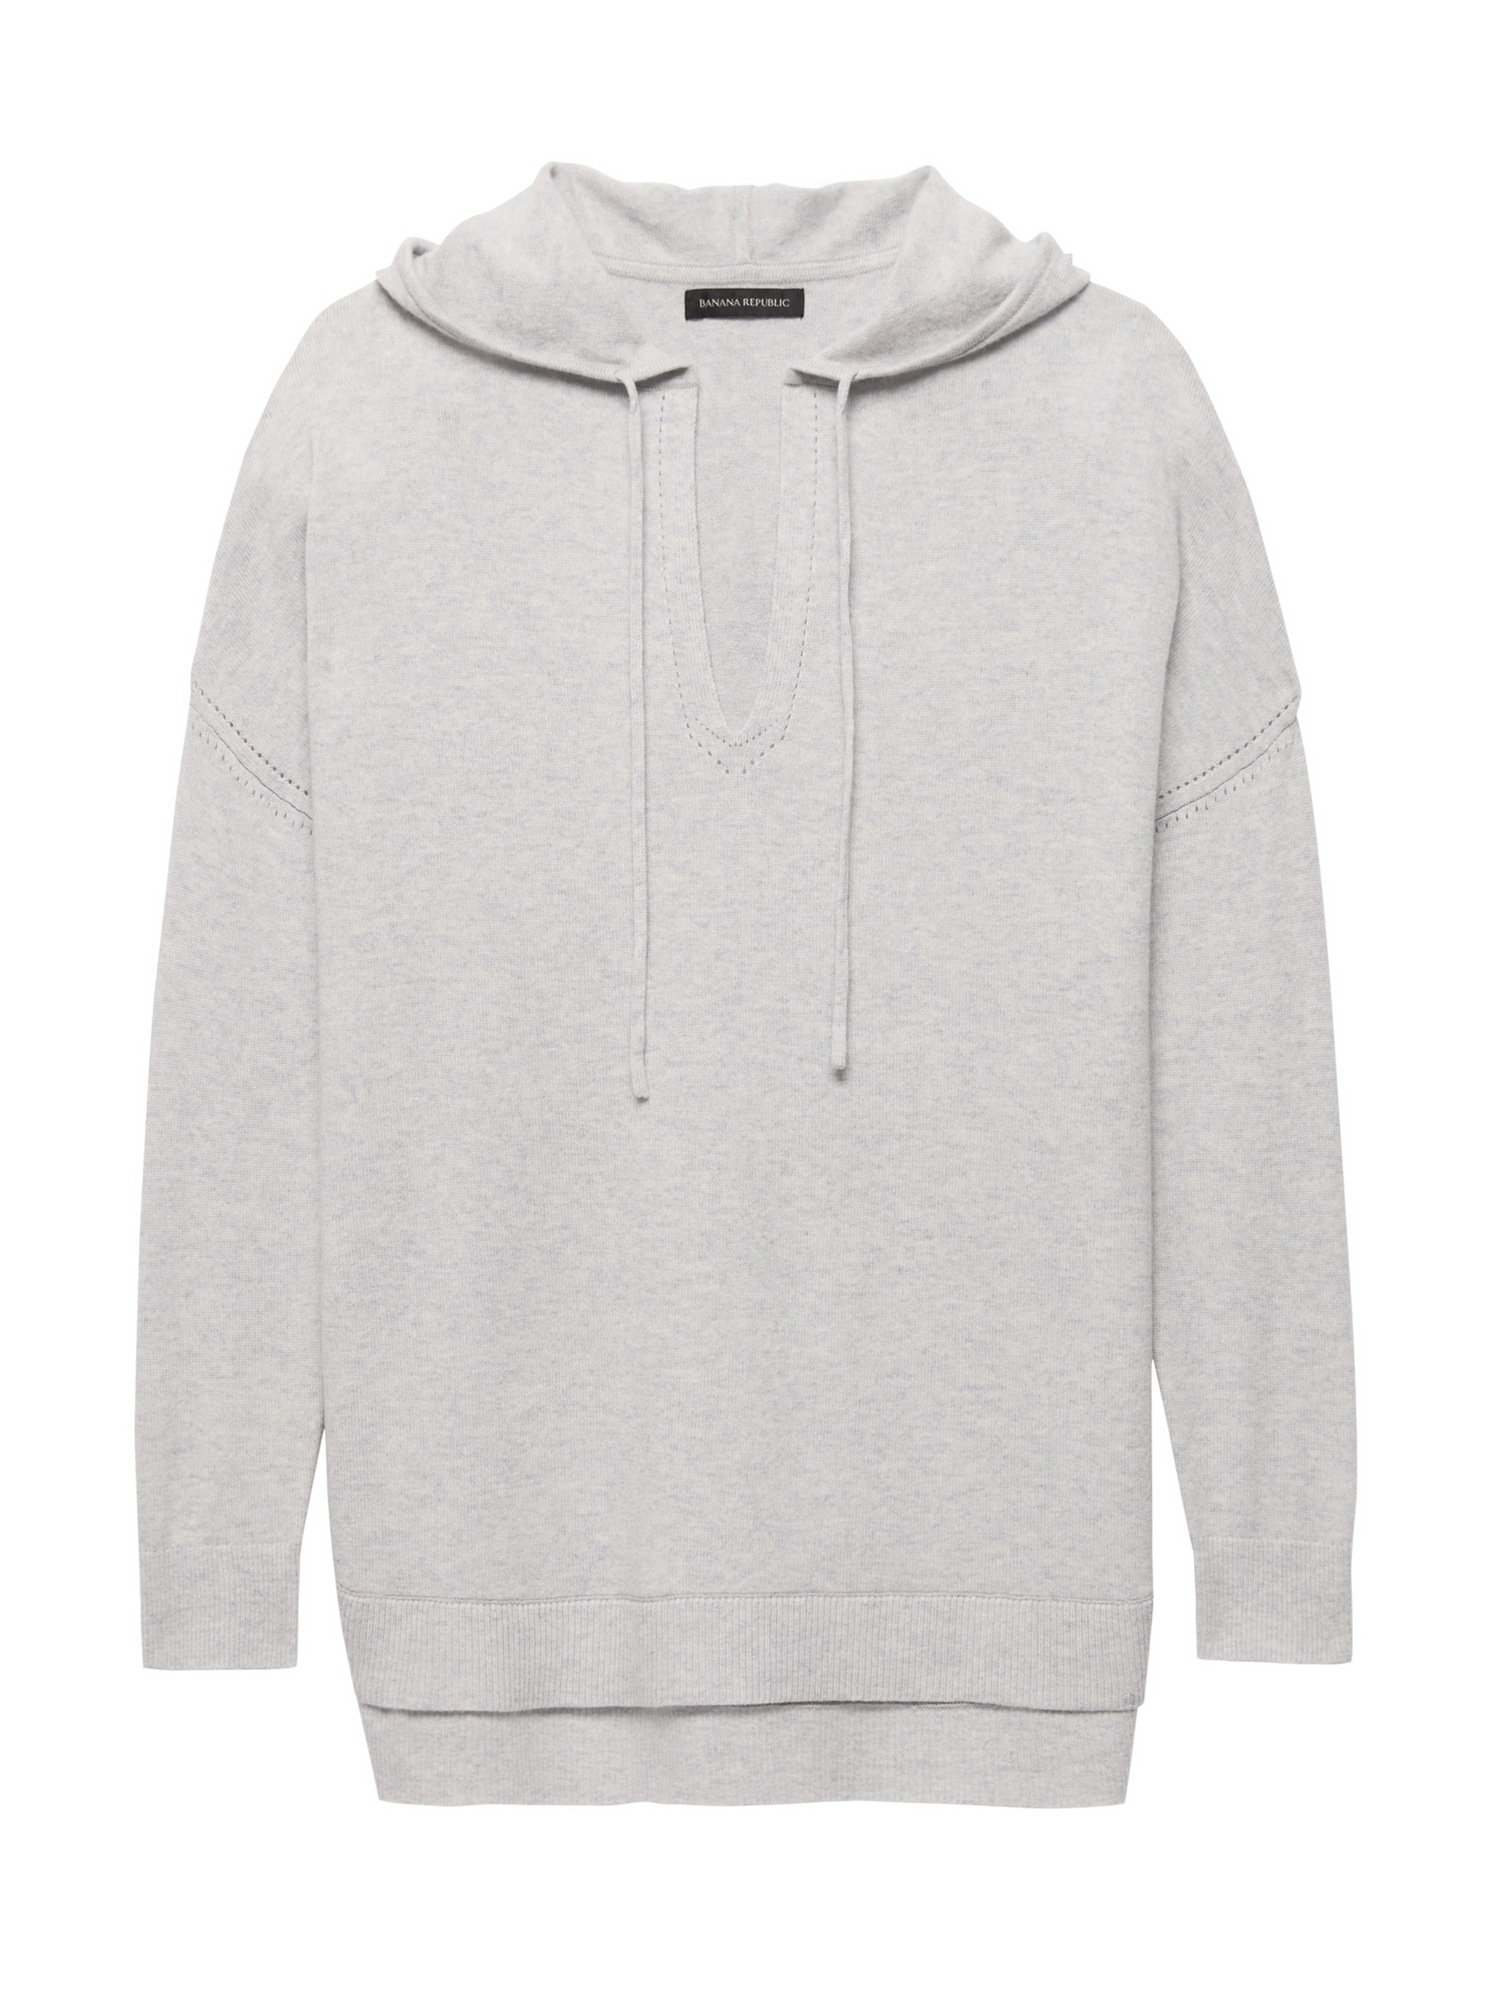 LIFE IN MOTION Machine-Washable Cashmere Blend Round Popover Hoodie